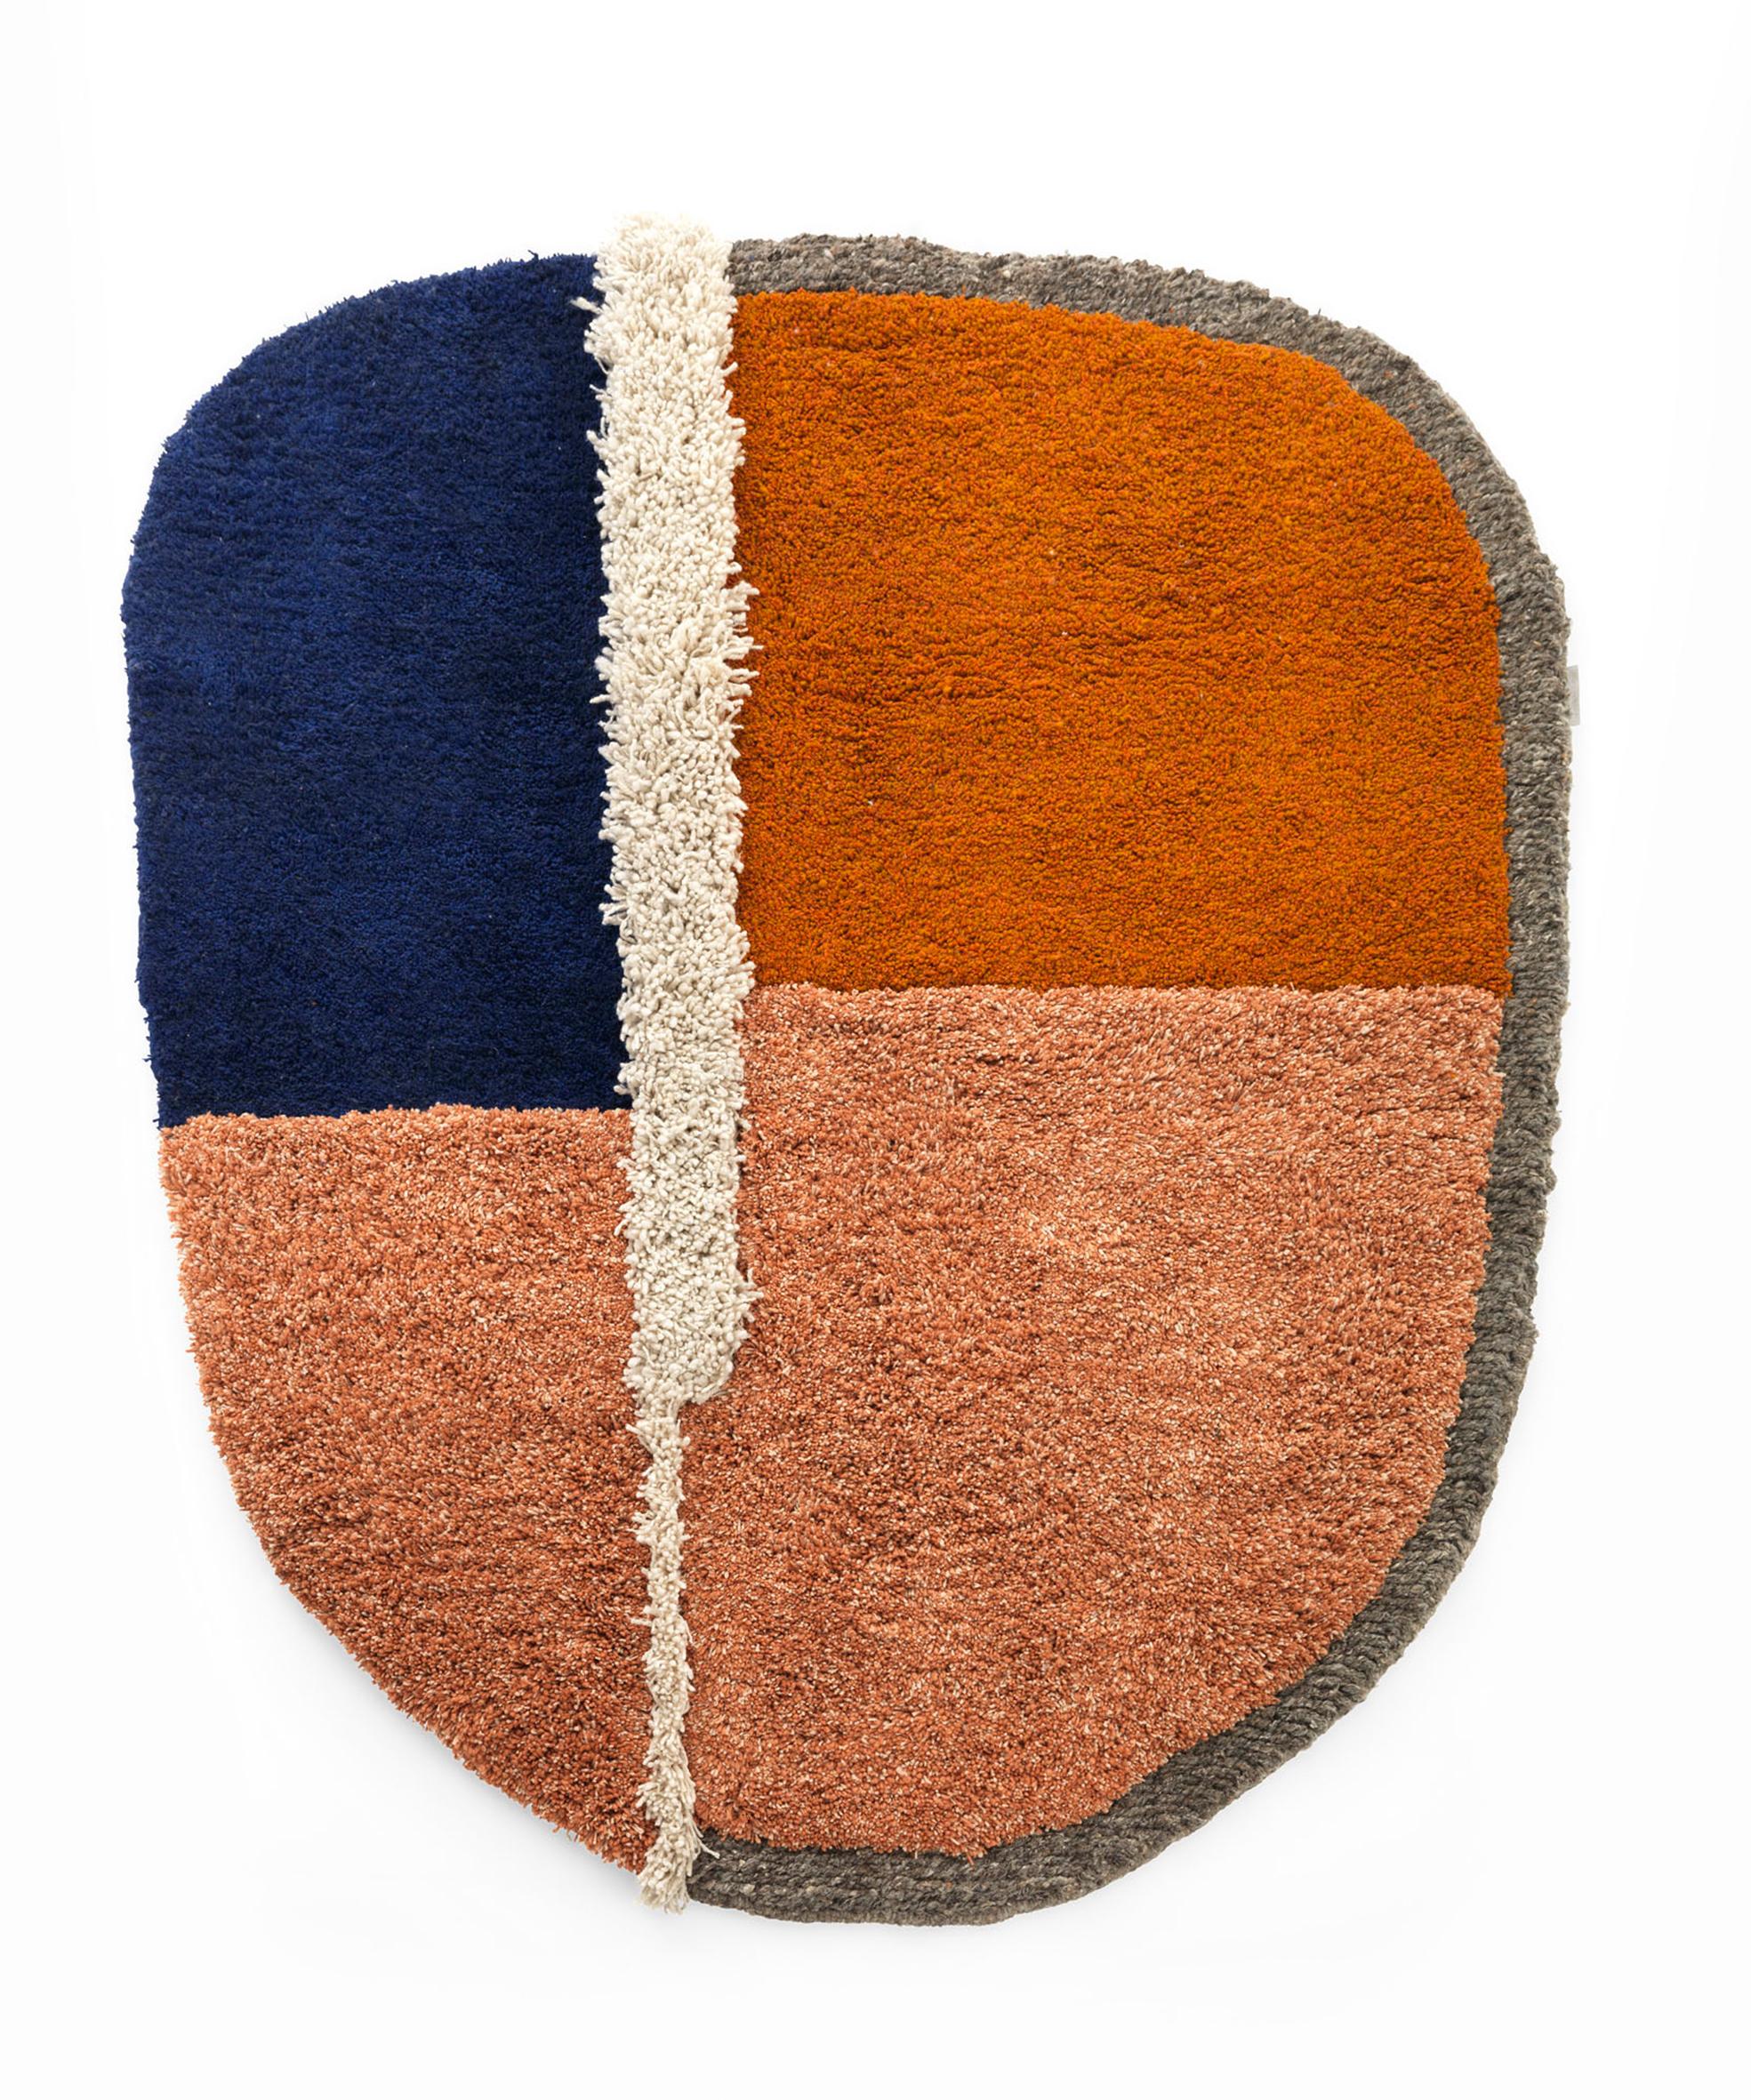 Large Nudo rug by Sebastian Herkner
Materials: 100% natural virgin wool. 
Technique: hand-woven in Colombia.
Dimensions: W 180 x L 220 cm 
Available in colors: white/ beige/ rose, grey/ green/ black, blue/ orange/ ochre, brown/ black/ grey,